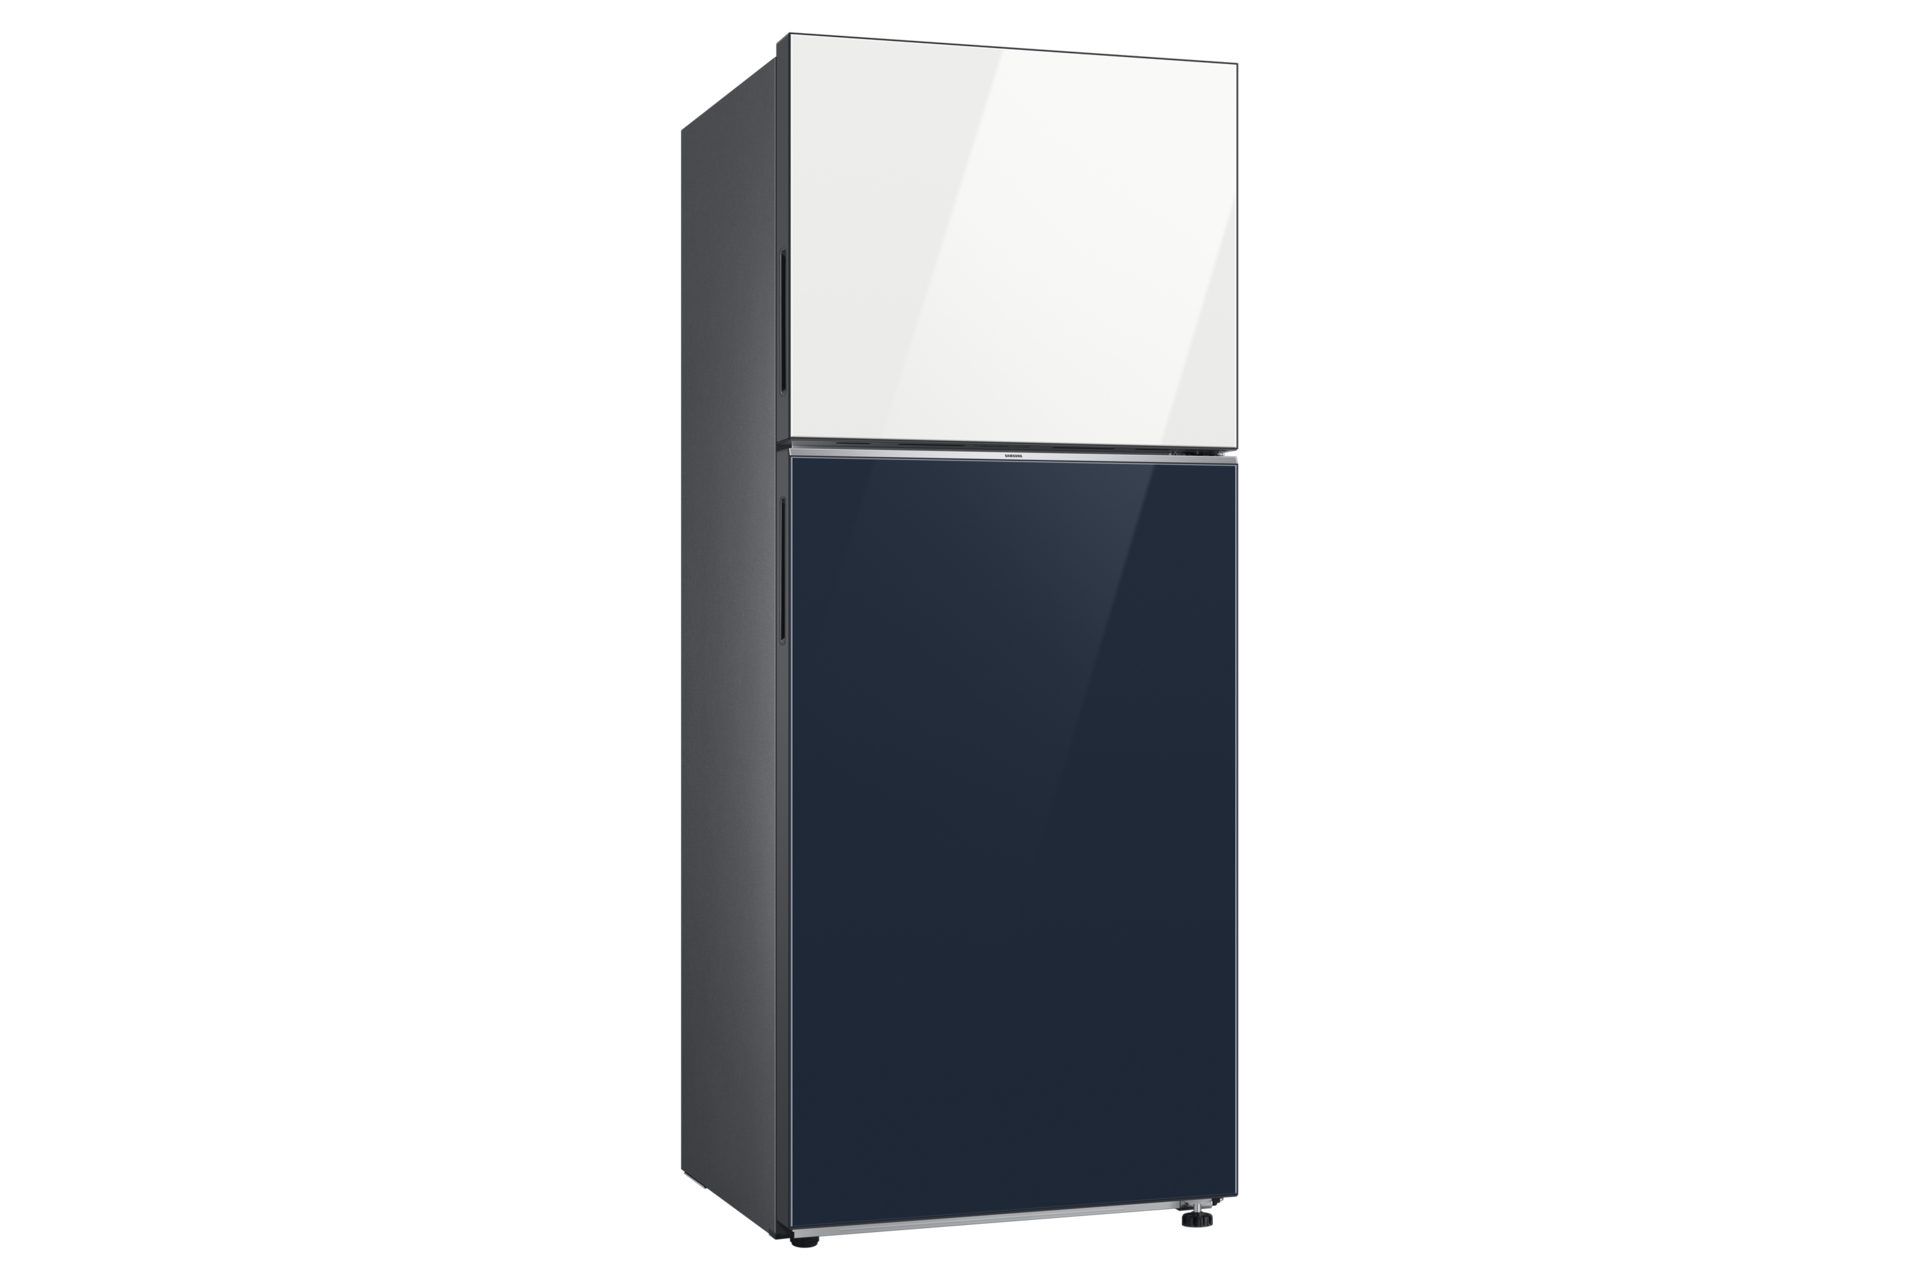 Bespoke Top Mount Freezer Refrigerator with AI Energy in Clean White + Clean Navy, 13.9 cu.ft